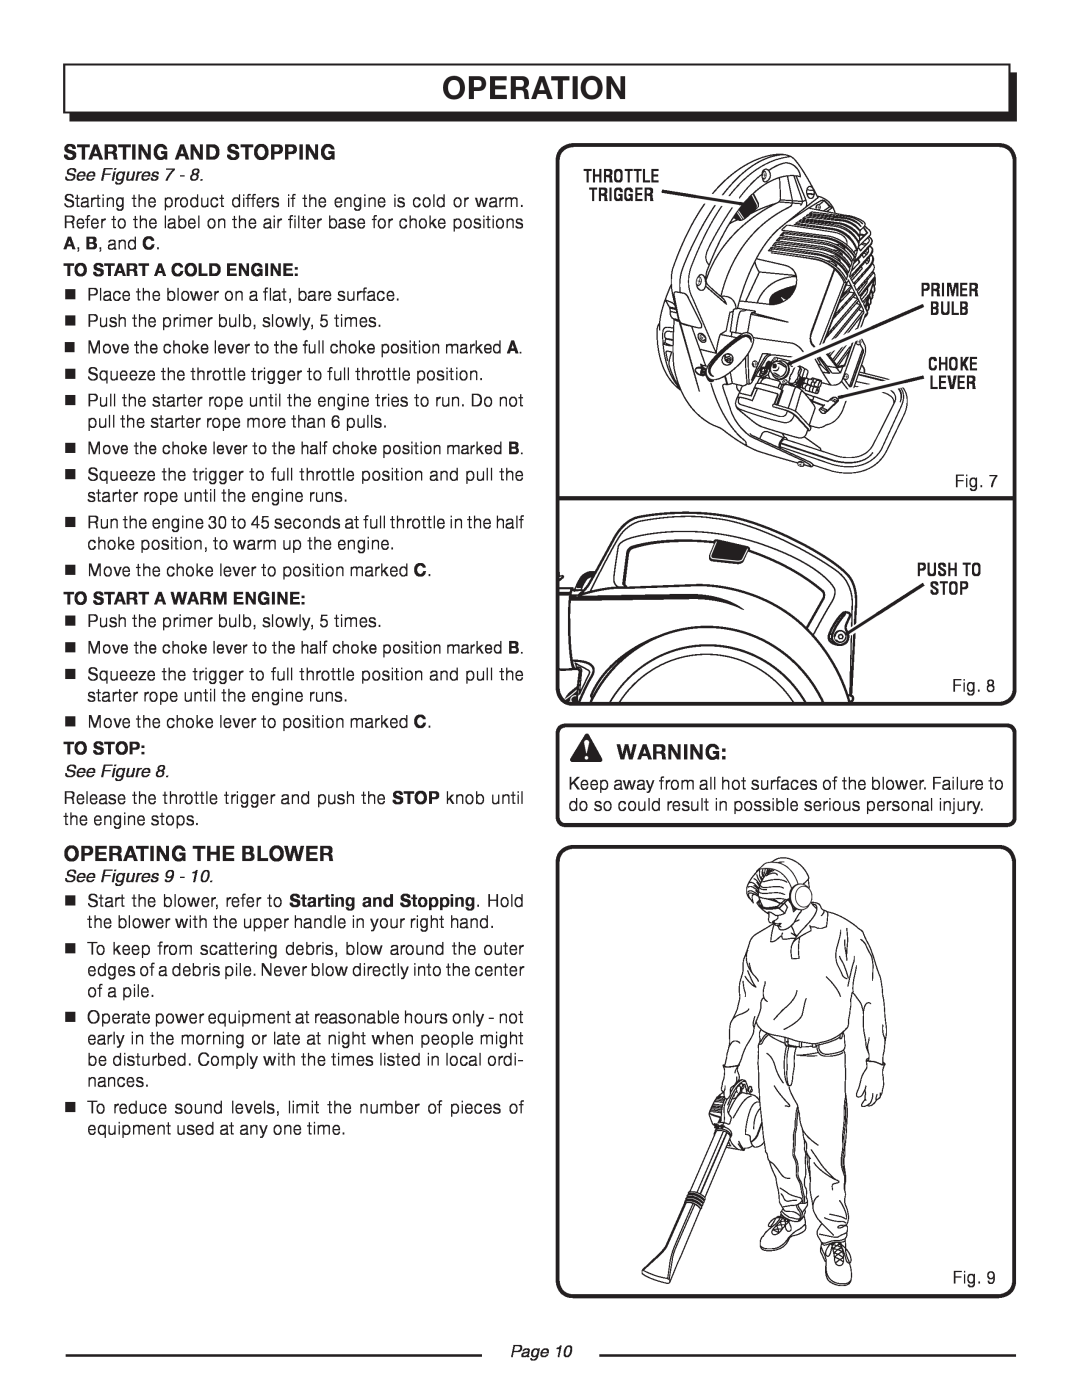 Homelite UT08934D manual Operation, See Figures, To Start A Cold Engine, To Start A Warm Engine, Push To Stop, Page 